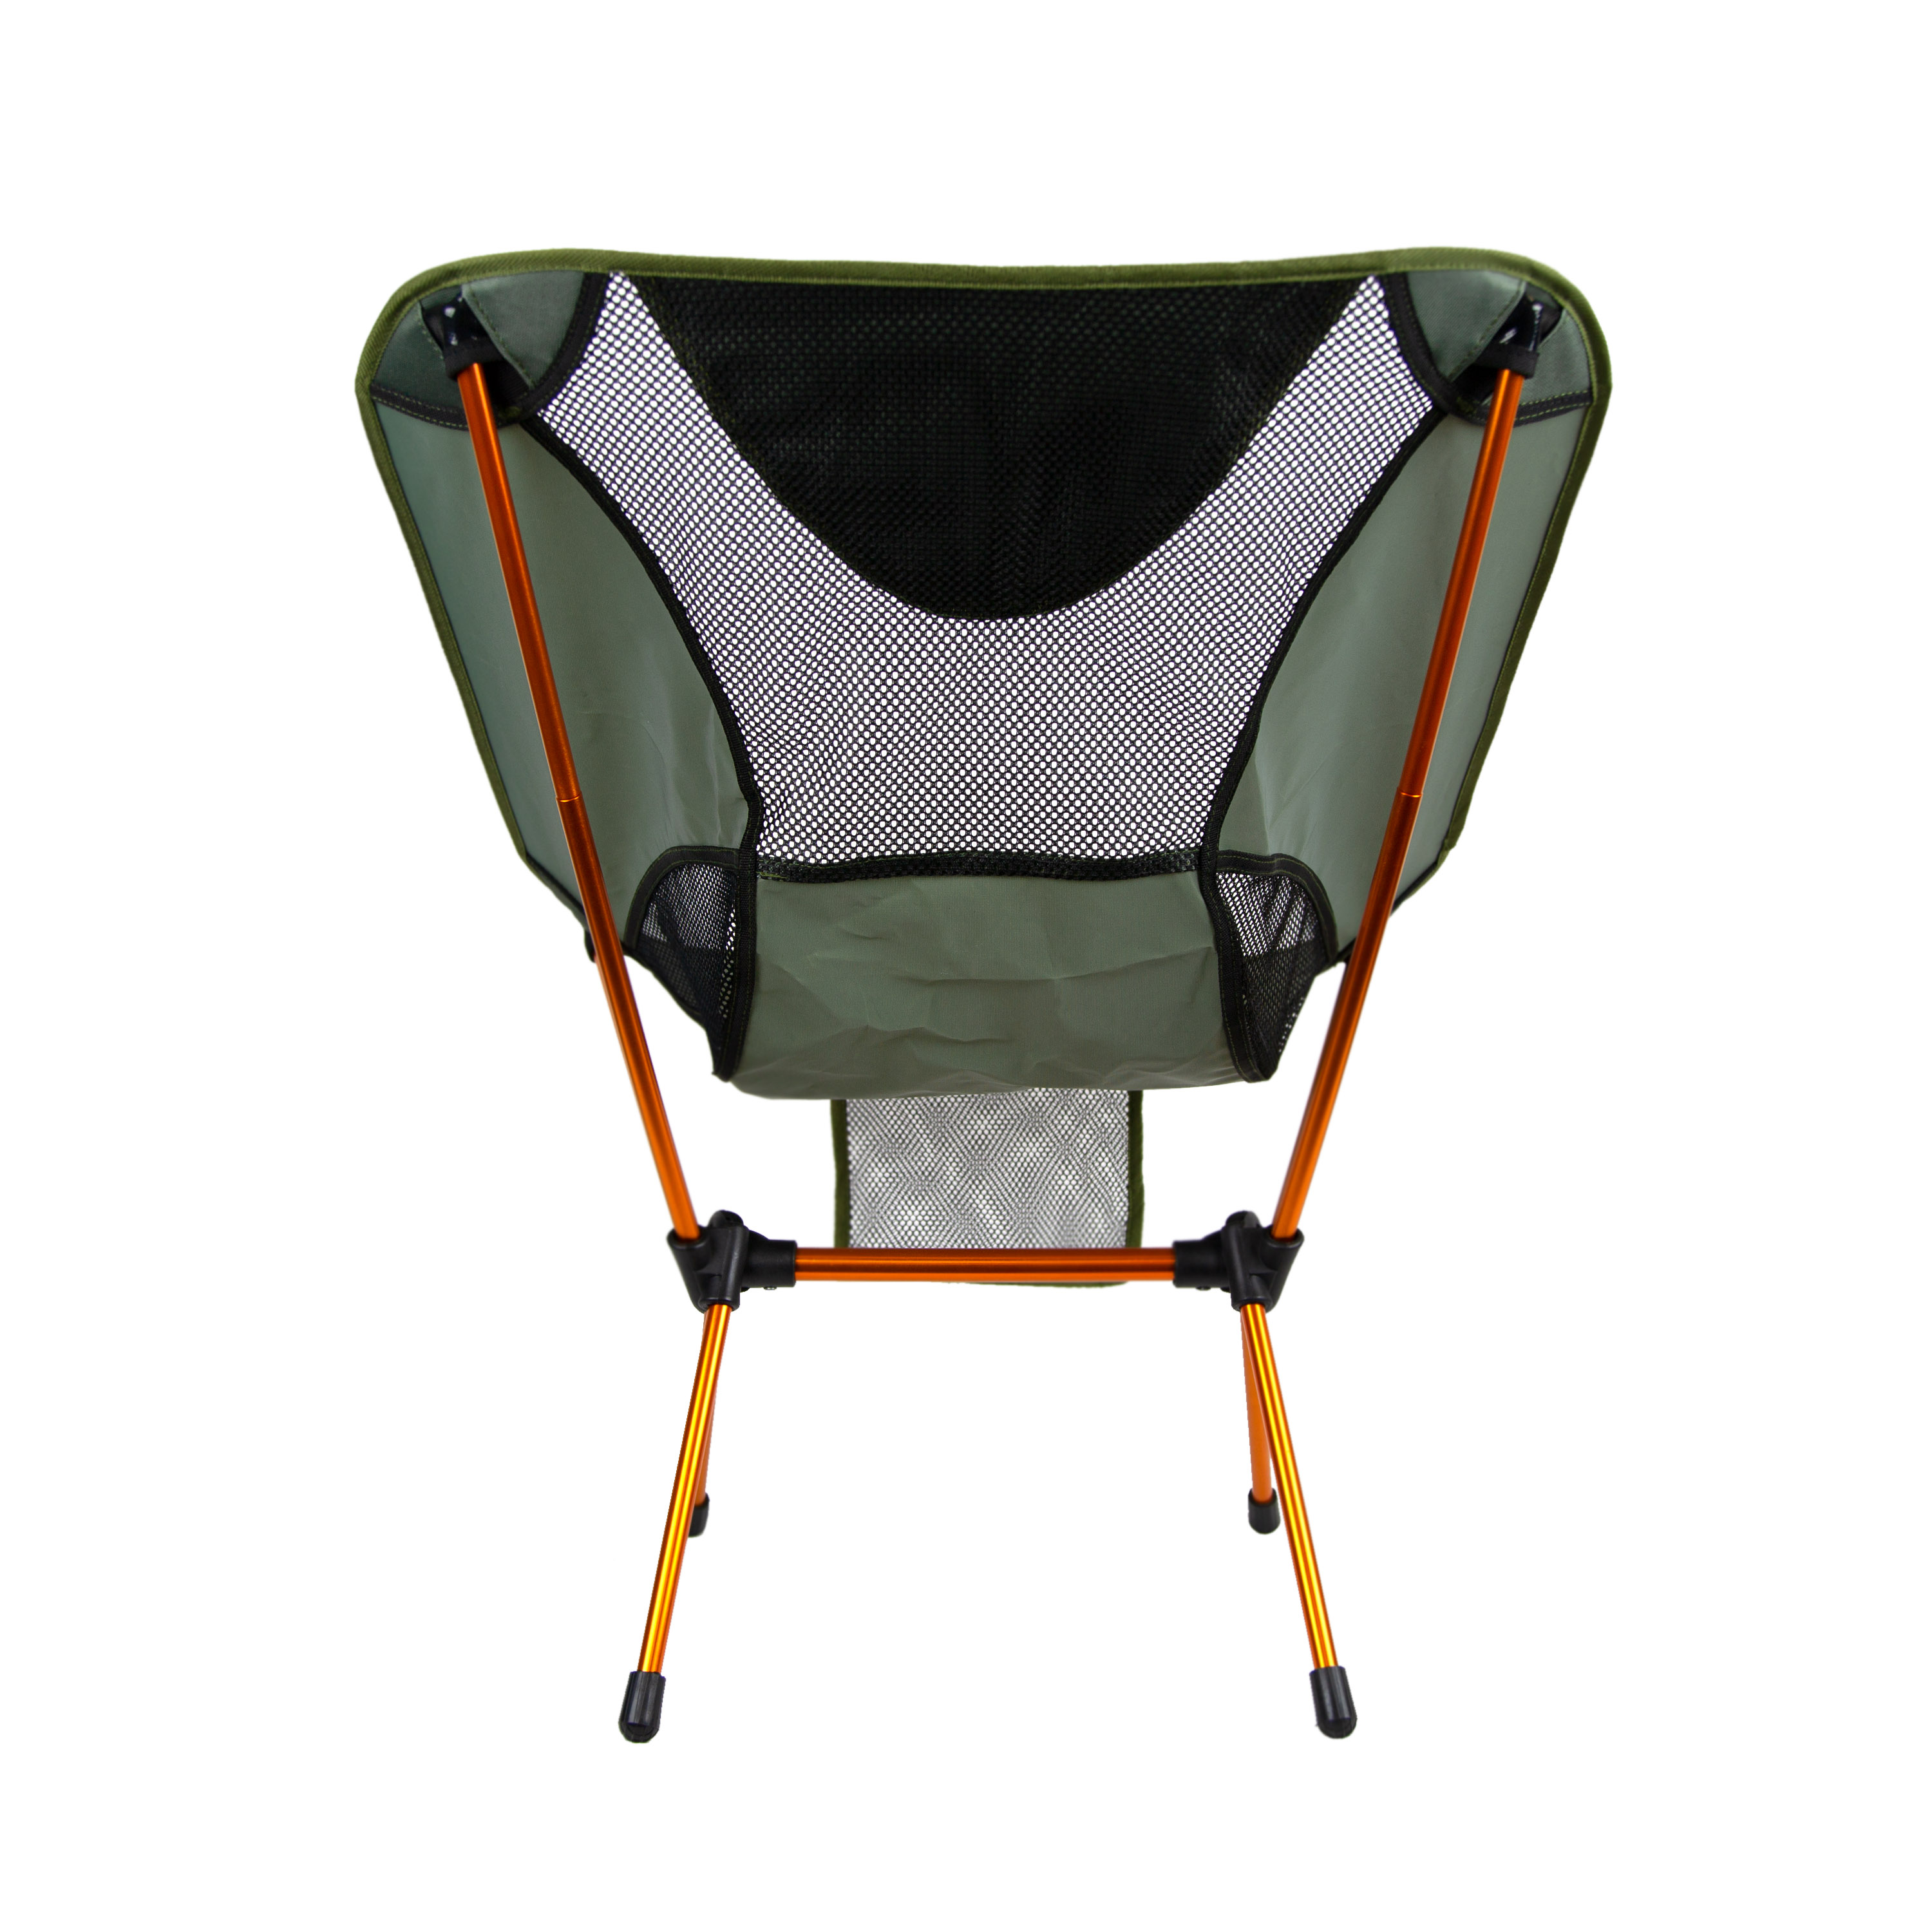 Ozark Trail Himont Compact Camp Lite Chair Set for Camping - Single chair, Green - image 5 of 11